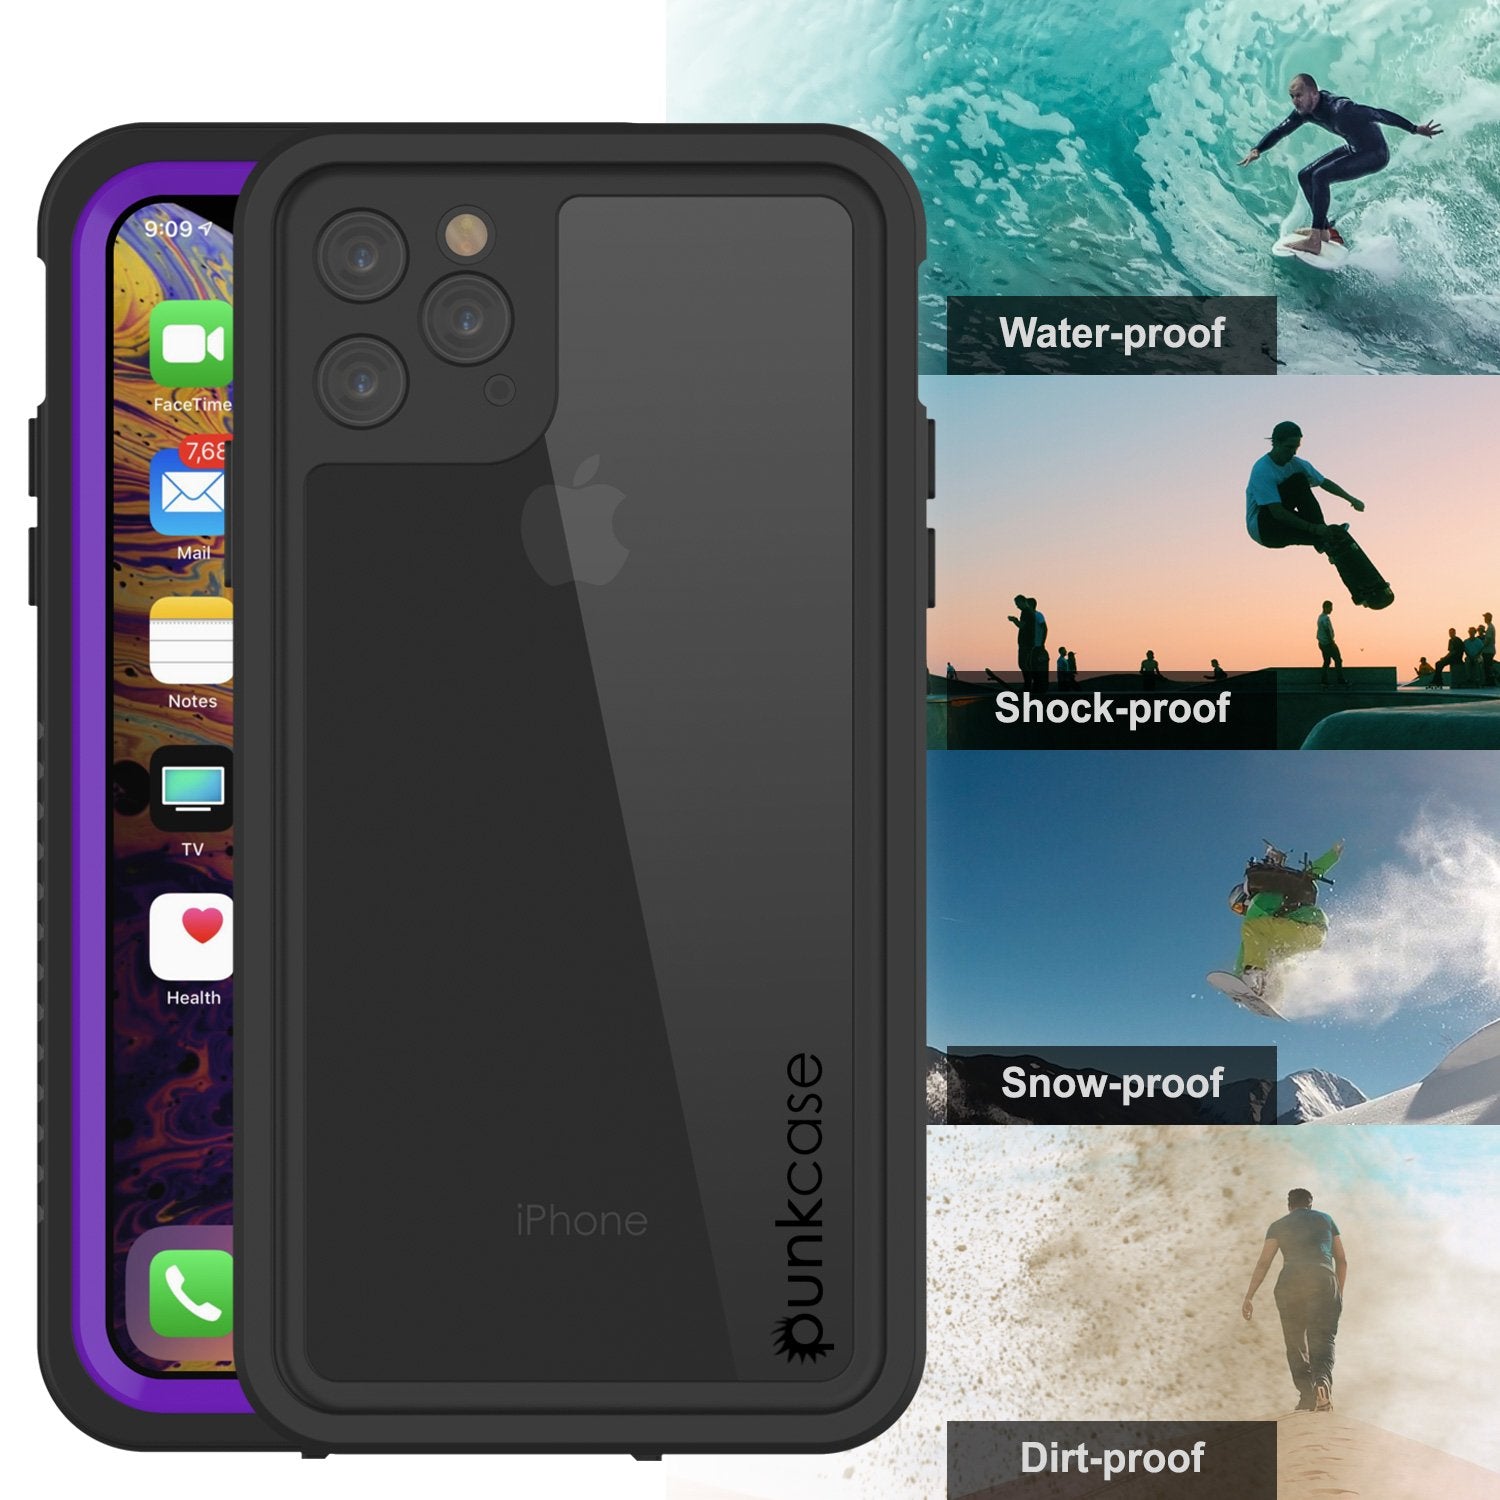 iPhone 11 Pro Max Waterproof Case, Punkcase [Extreme Series] Armor Cover W/ Built In Screen Protector [Purple]